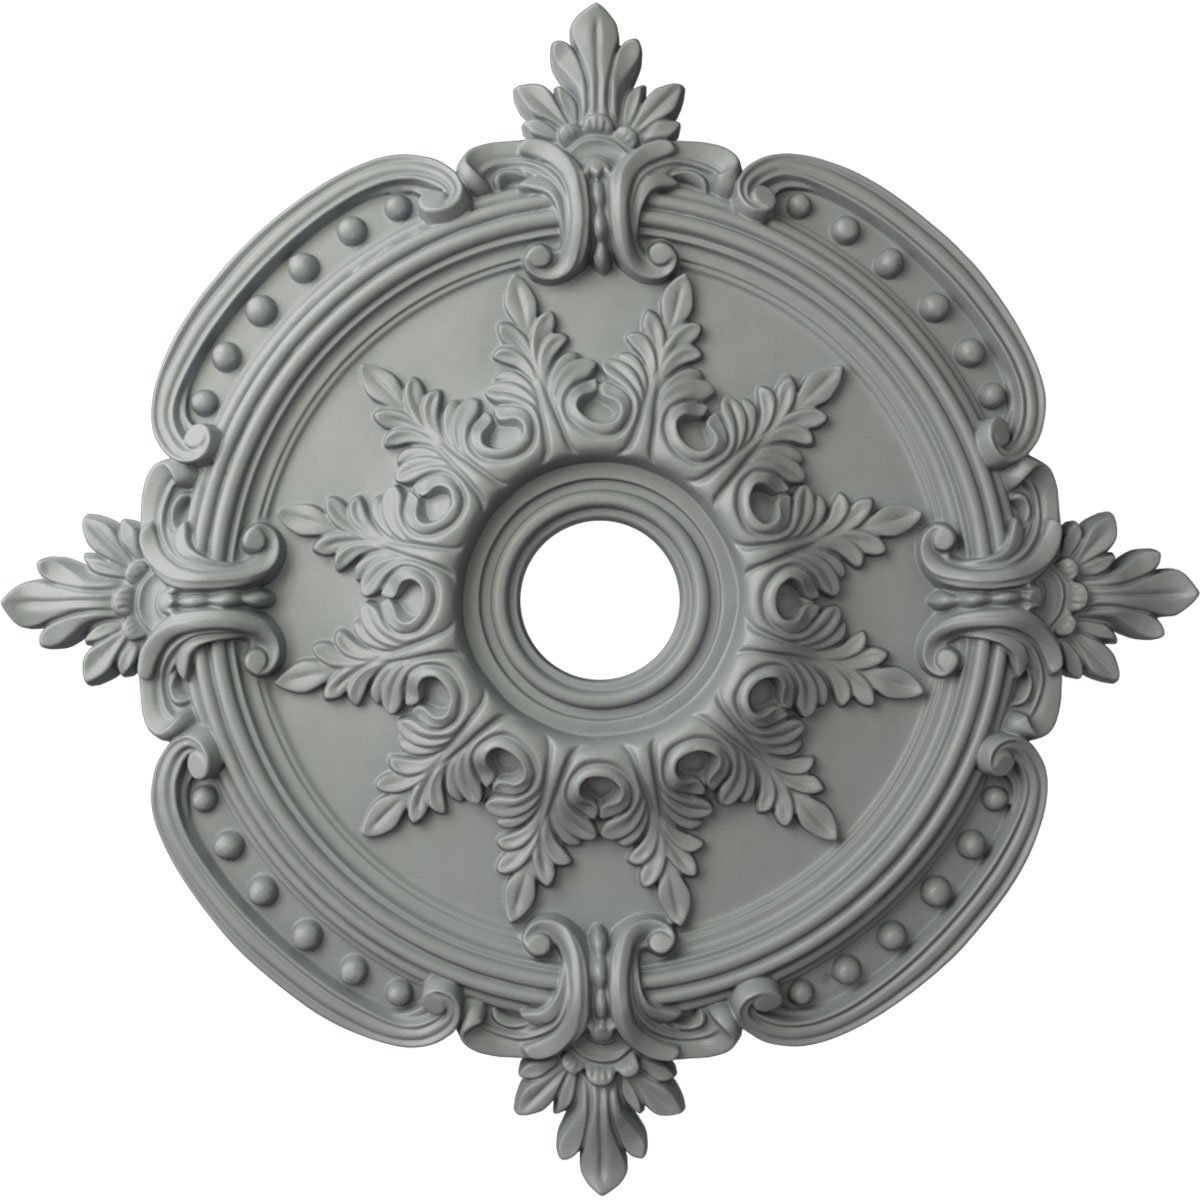 28 3/8-Inch OD x 3 3/4-Inch ID x 1 5/8-Inch P Benson Classic Ceiling  Medallion (Fits Canopies up to 6 1/2-Inch )